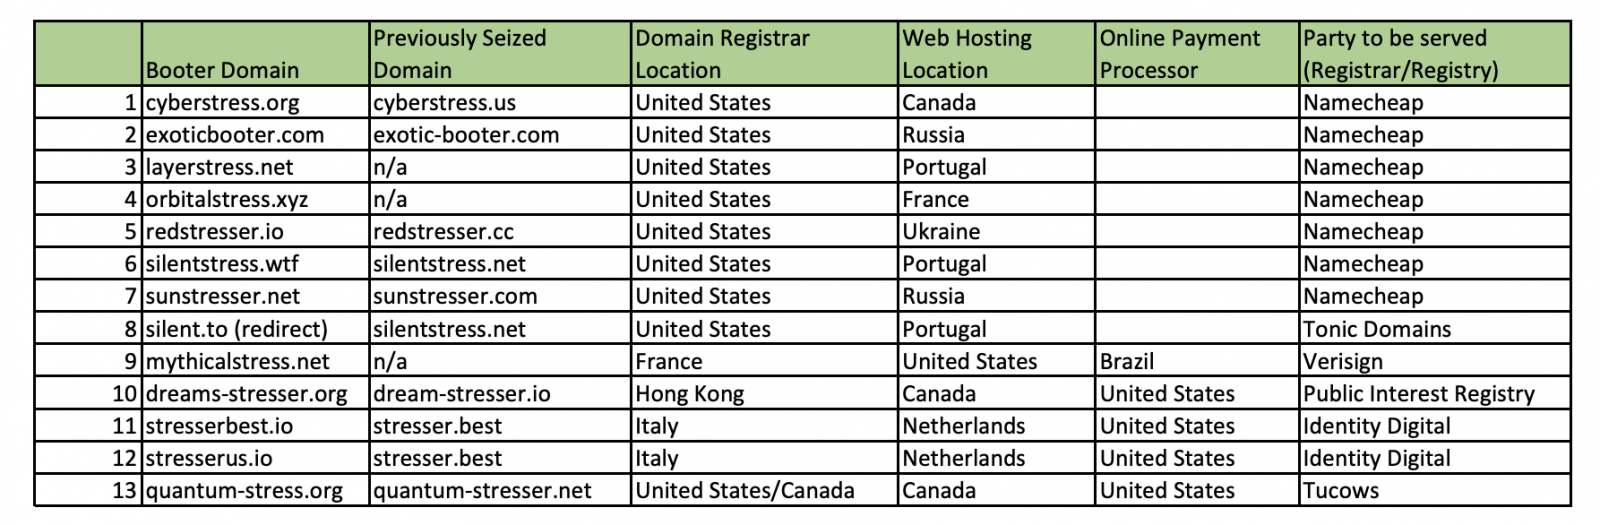 List of domains seized